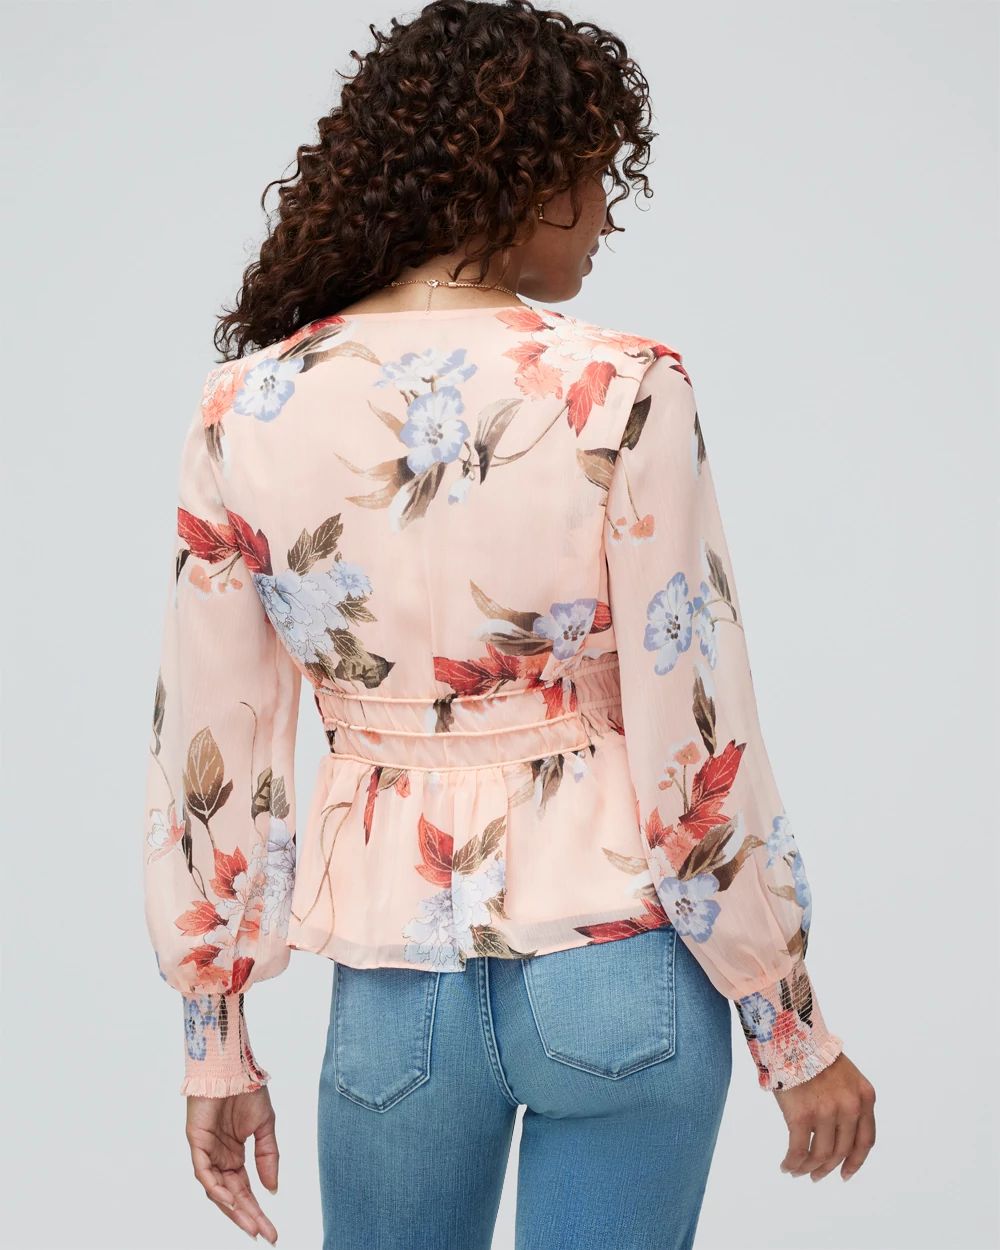 Petite Long Sleeve Romantic Blouse click to view larger image.